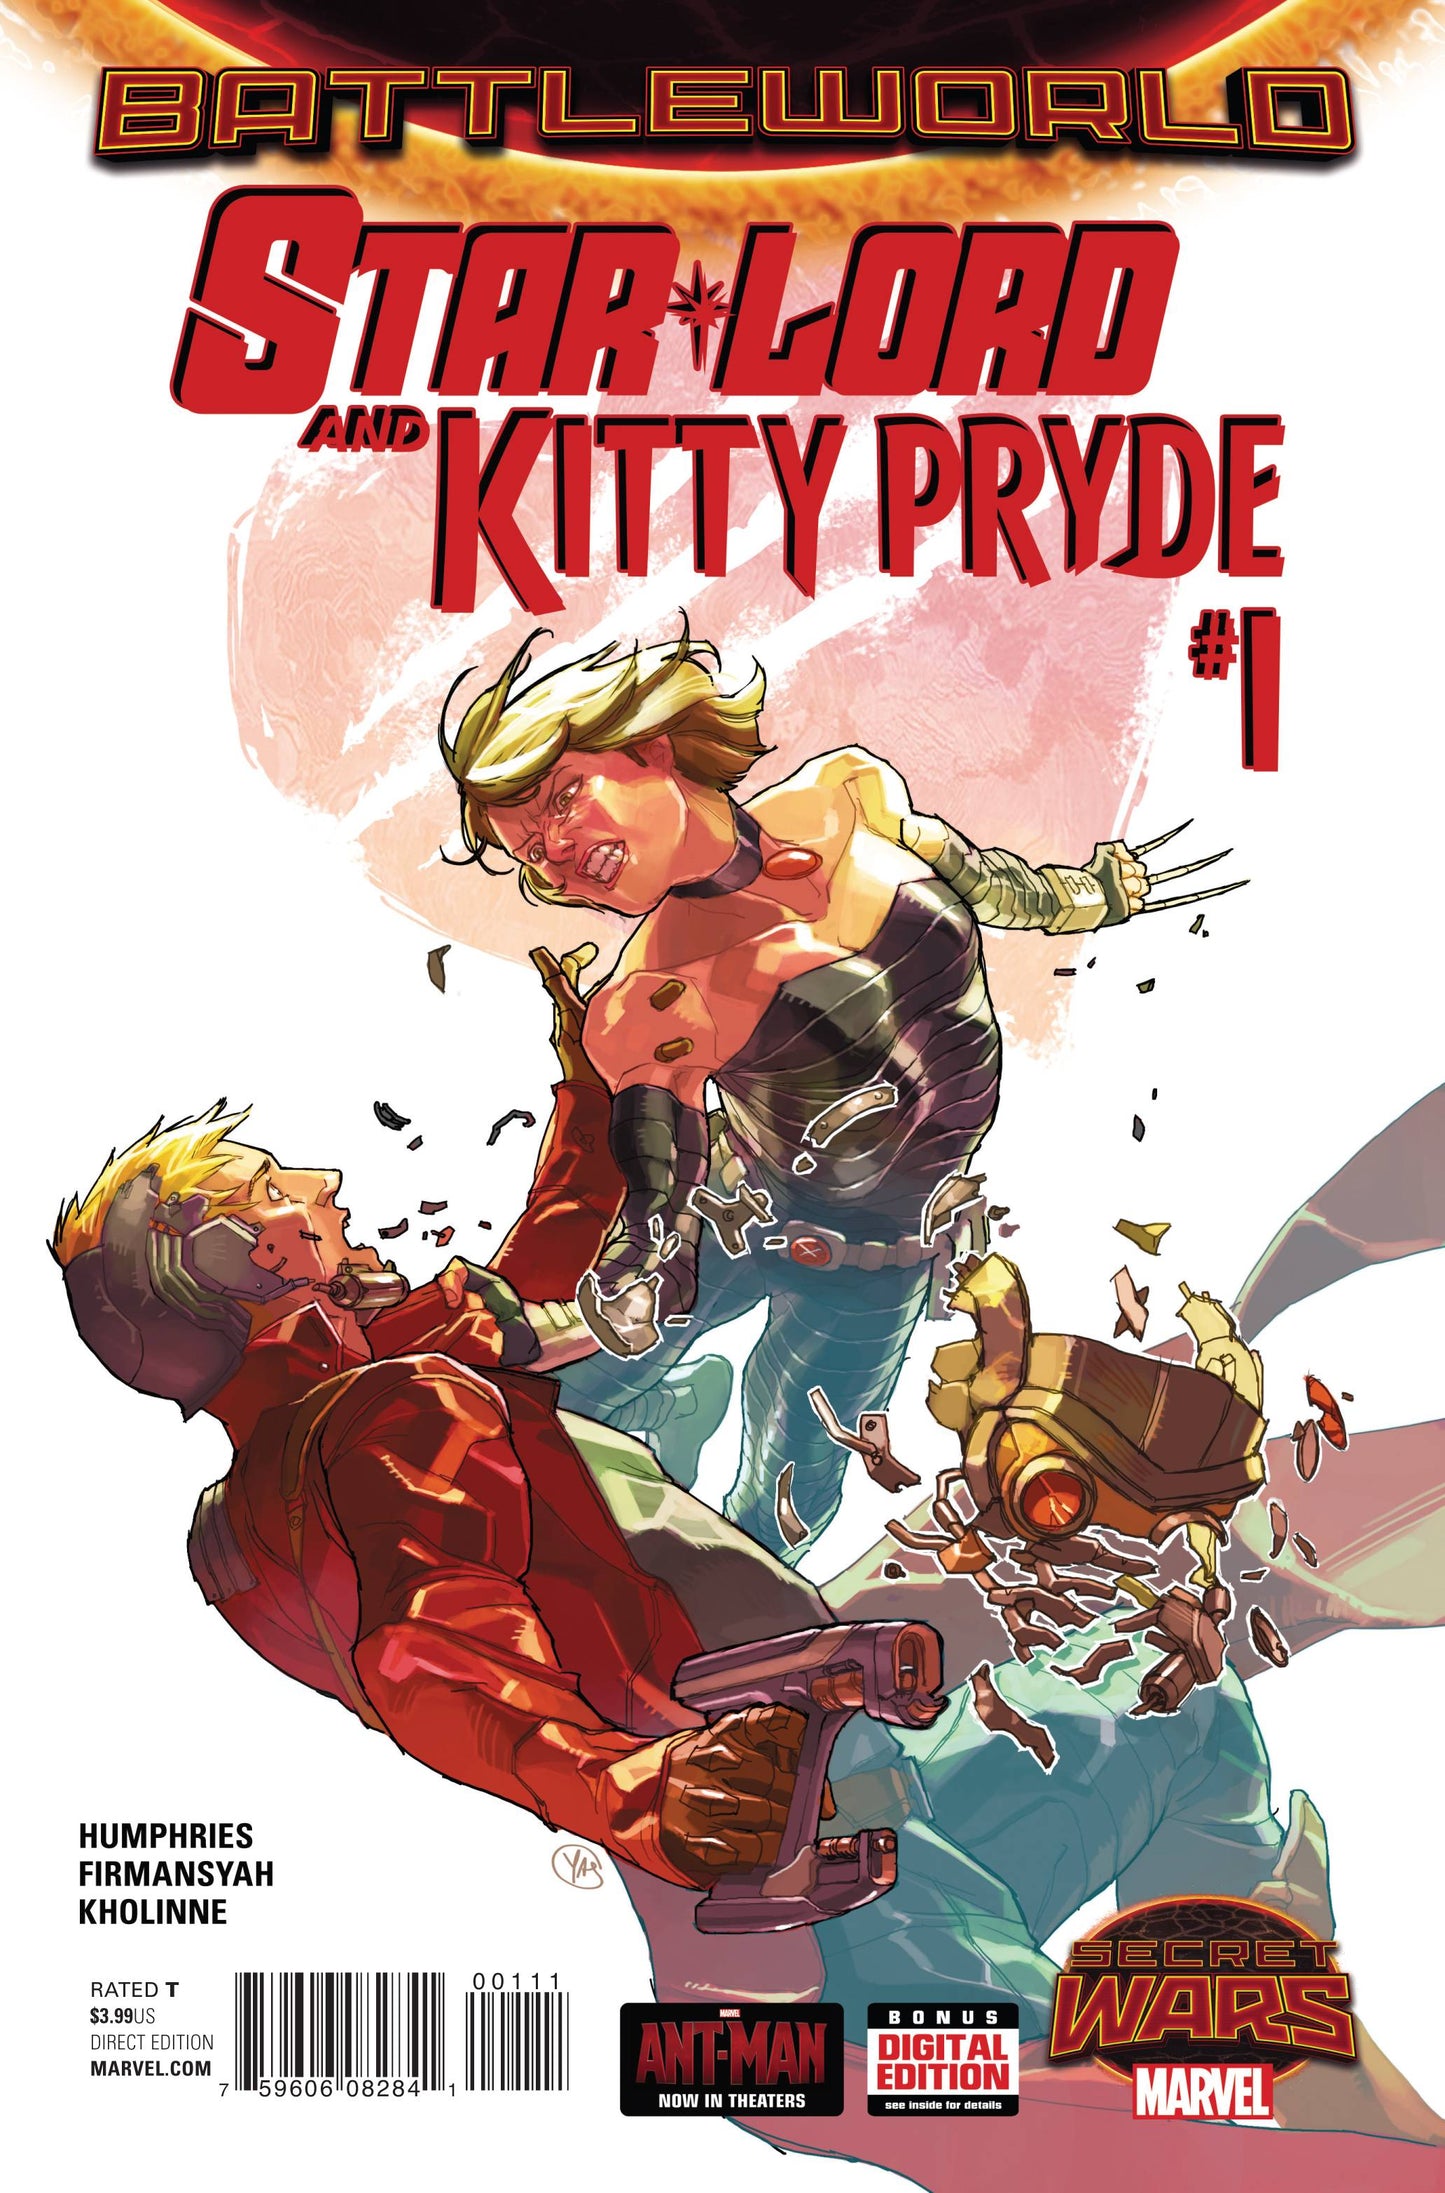 STAR-LORD AND KITTY PRYDE #1 2015